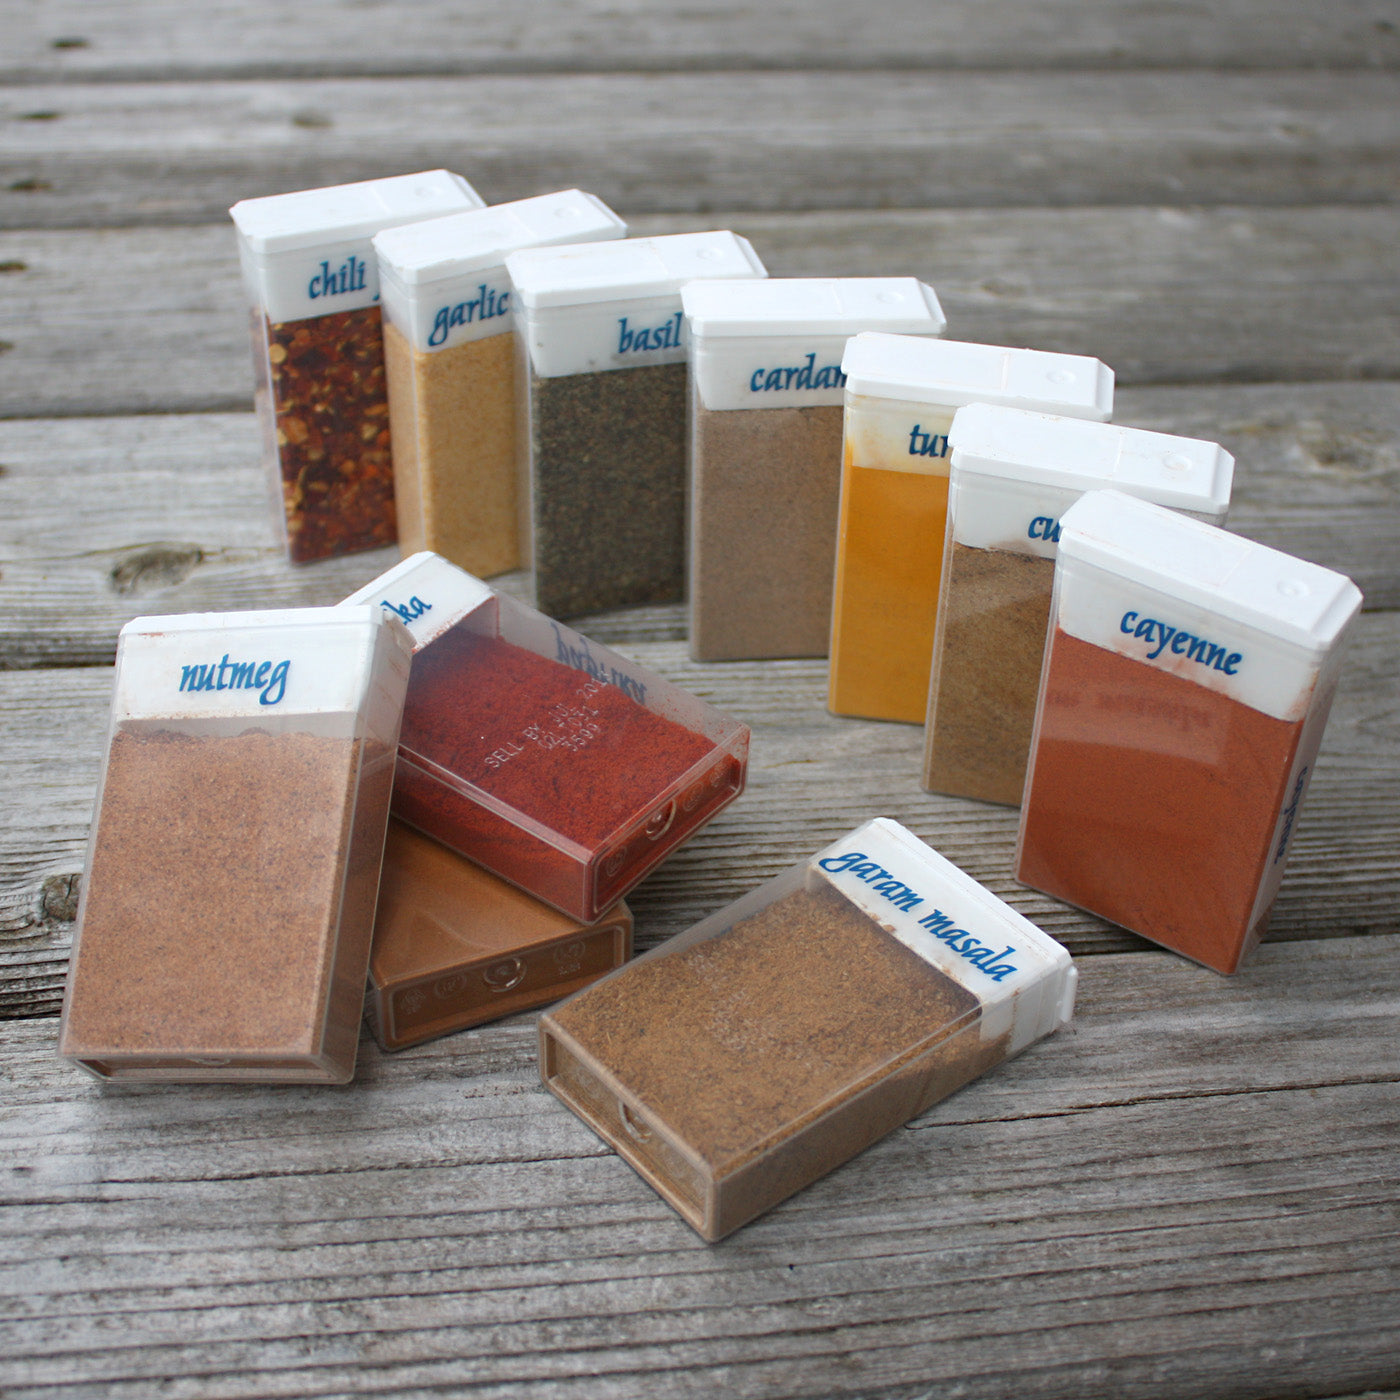 Travel Spice Kit Spice Containers for Camping, Portable Spice Kit